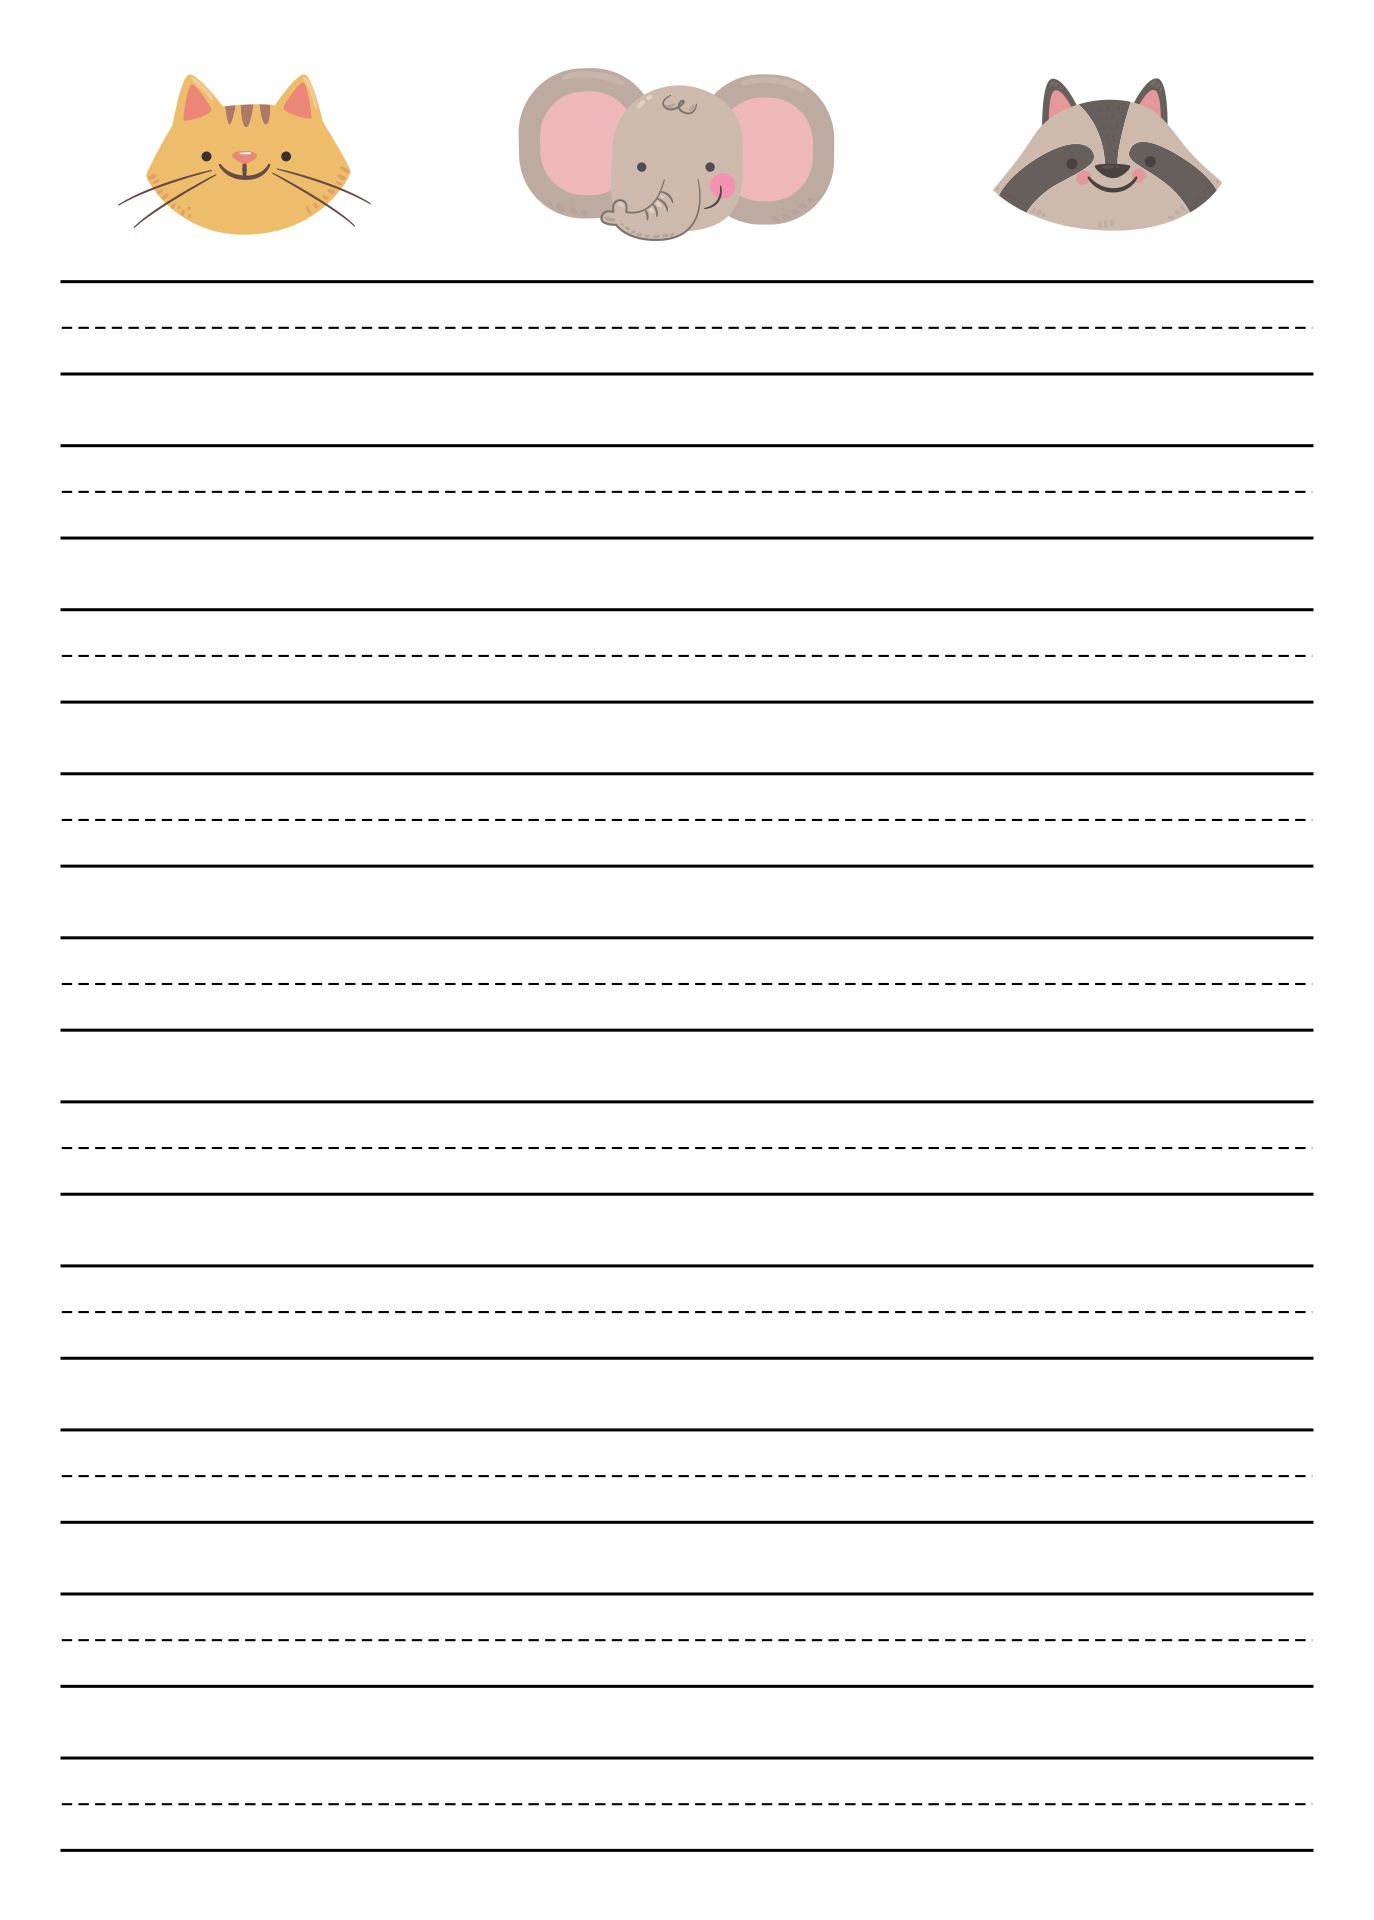 6-best-images-of-free-printable-lined-writing-paper-template